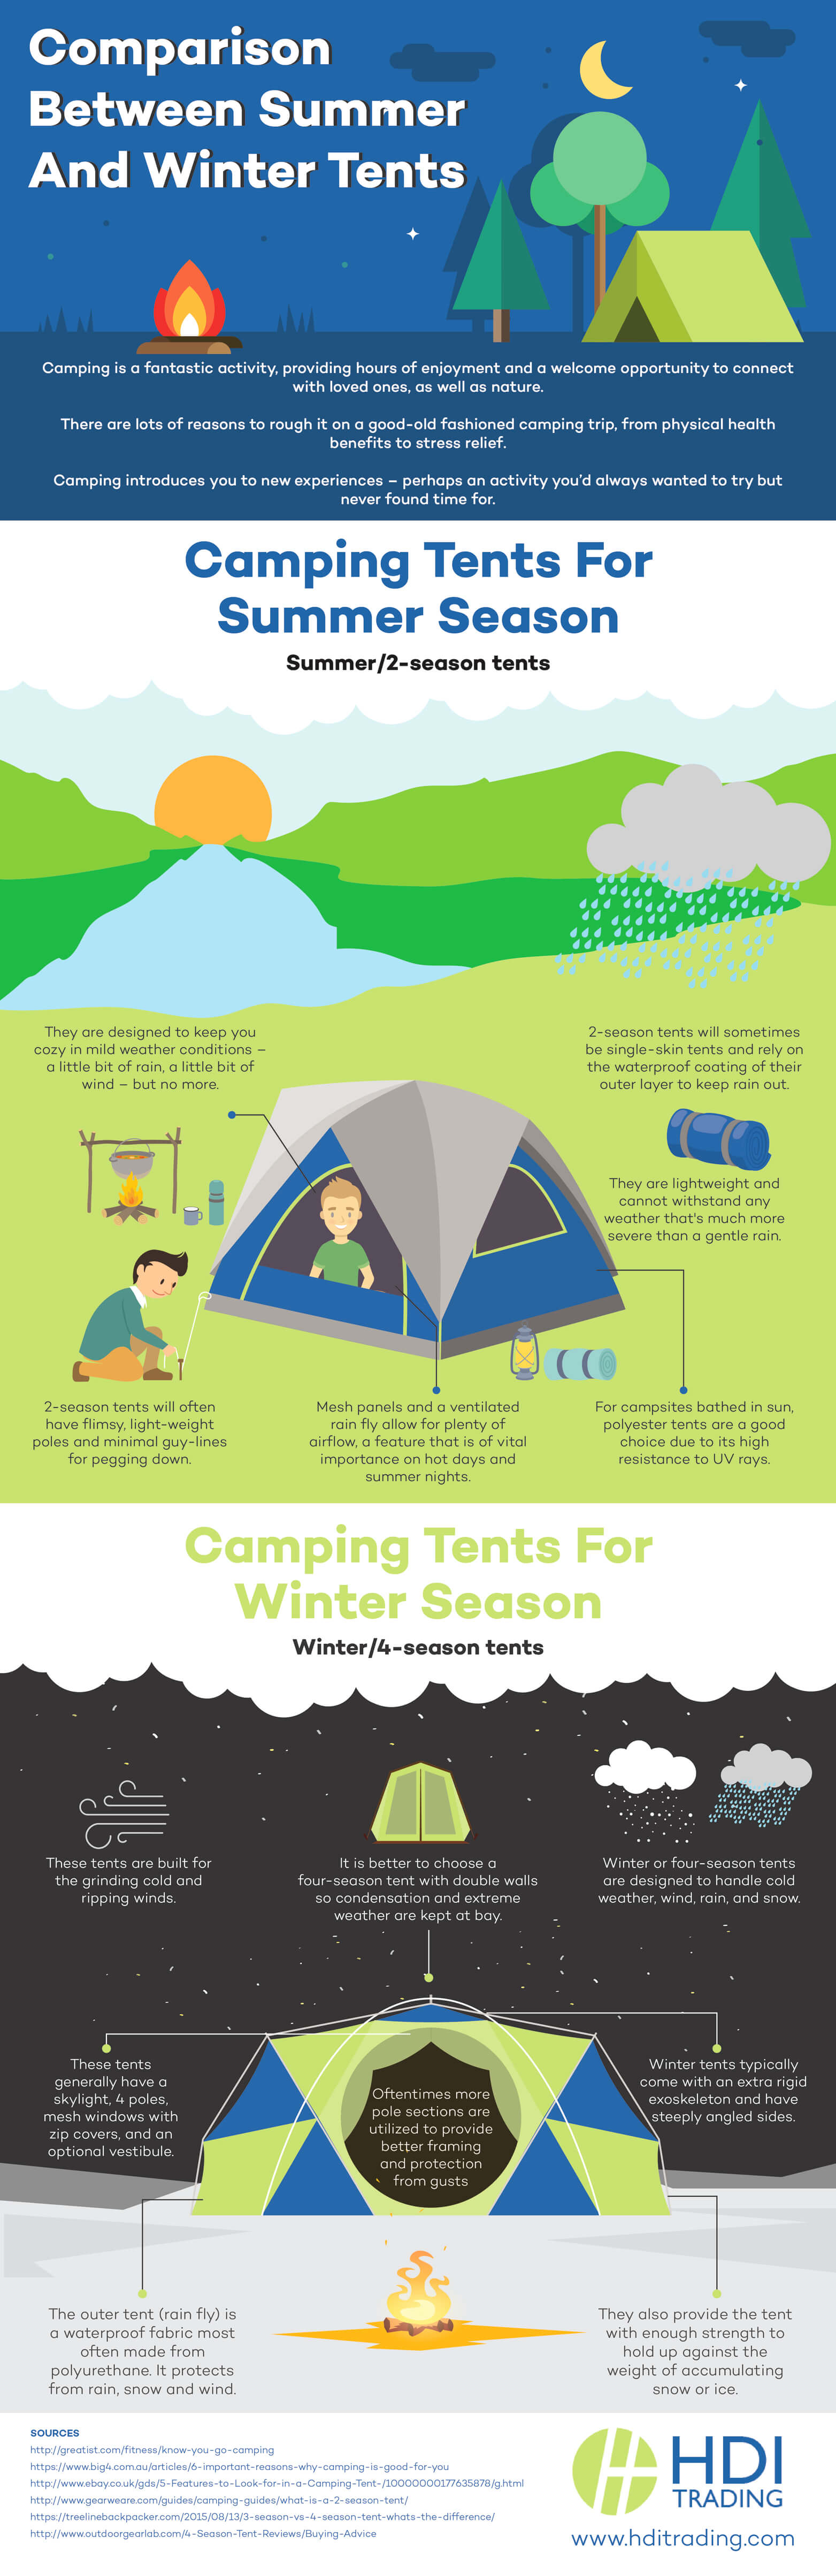 summer-vs-winter-tents-infographic-plaza